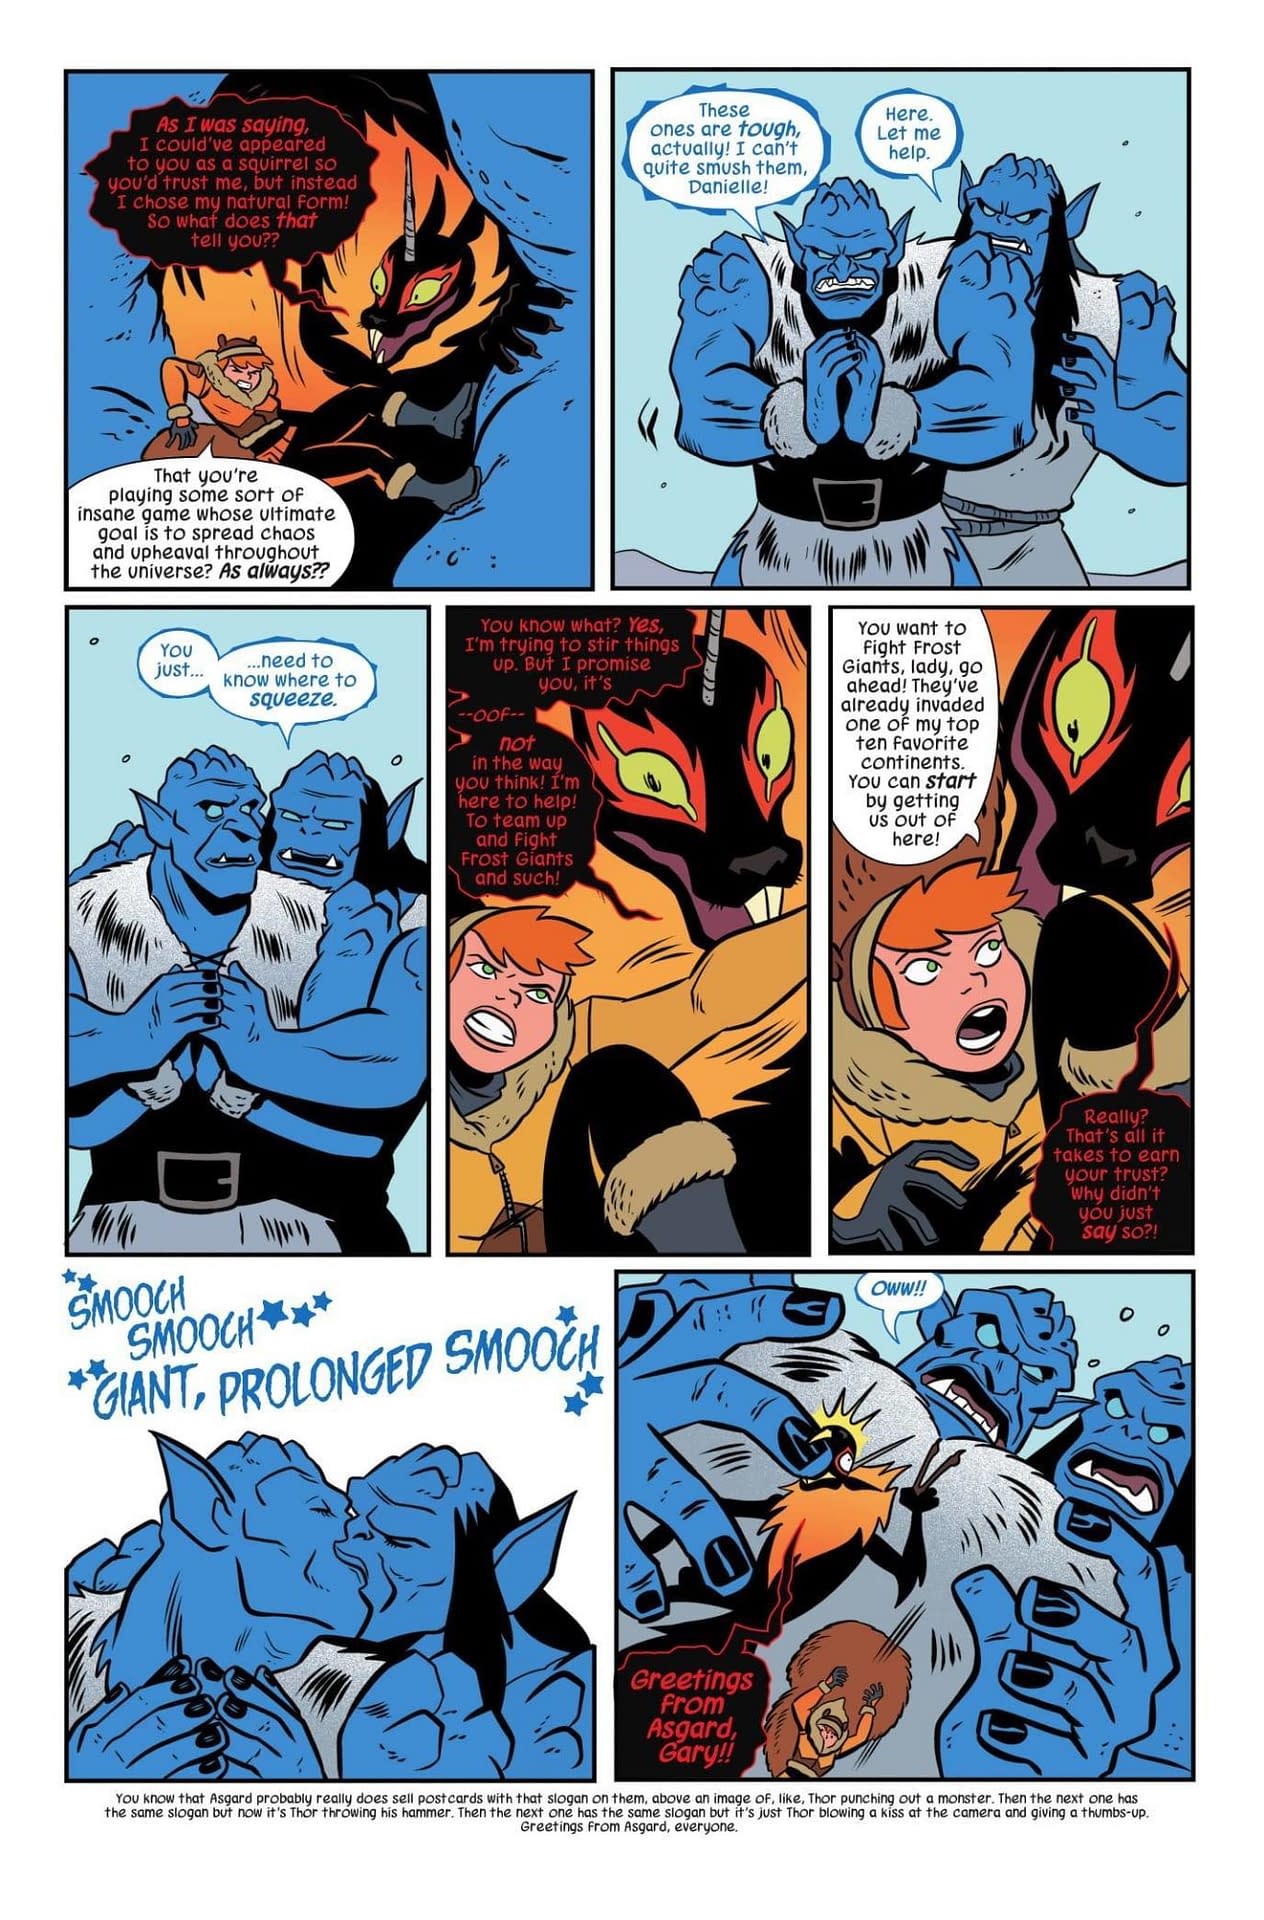 See a Hot Frost Giant Make-Out Session in This Preview of Unbeatable Squirrel Girl #44